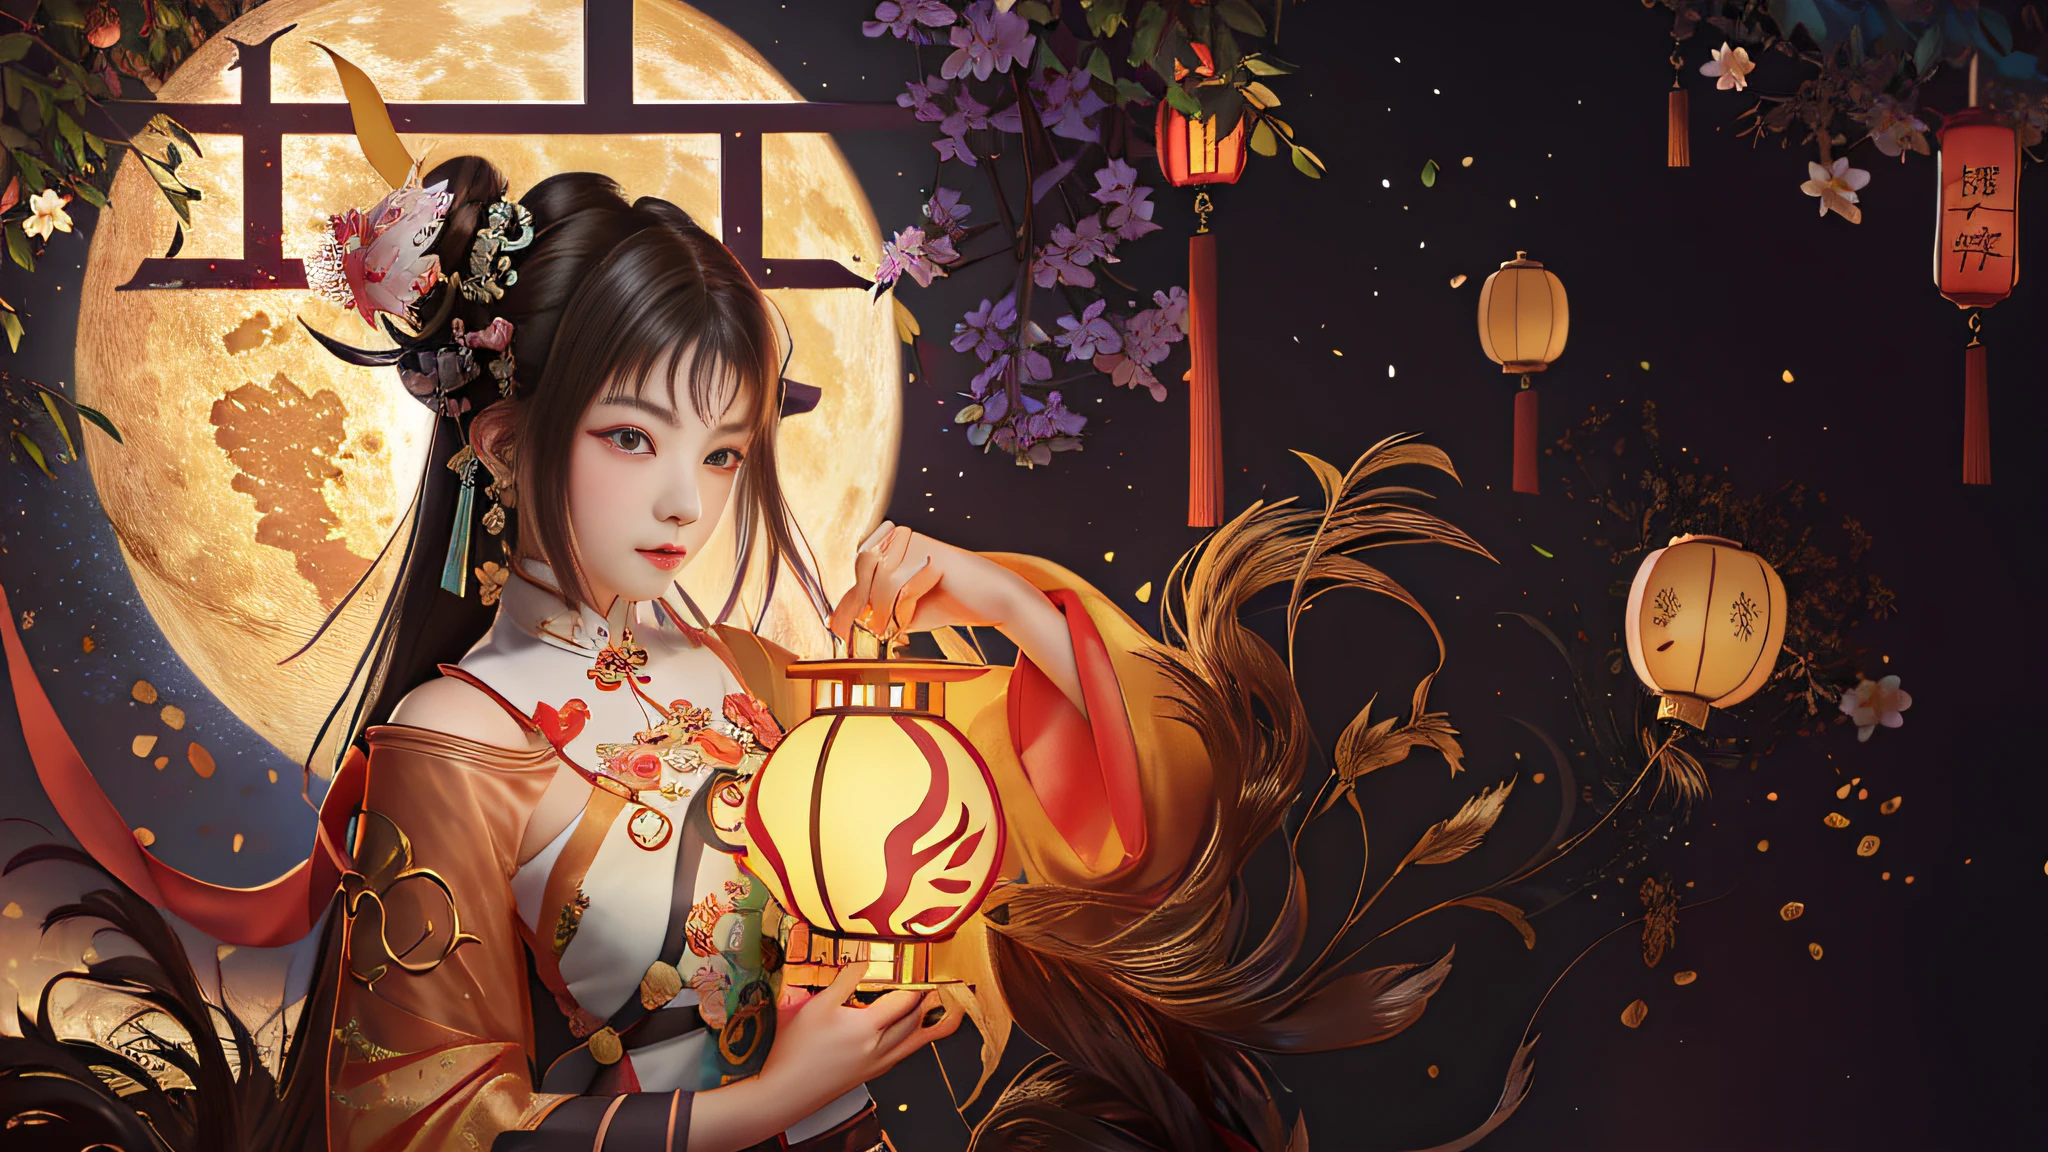 there is a woman holding a box in front of a full moon, girl under lantern, palace ， a girl in hanfu, a beautiful artwork illustration, holding a lantern, inspired by Lü Ji, chinese style painting, by Yang J, digital anime illustration, background artwork, ancient chinese princess, artwork in the style of guweiz, chinese painting style